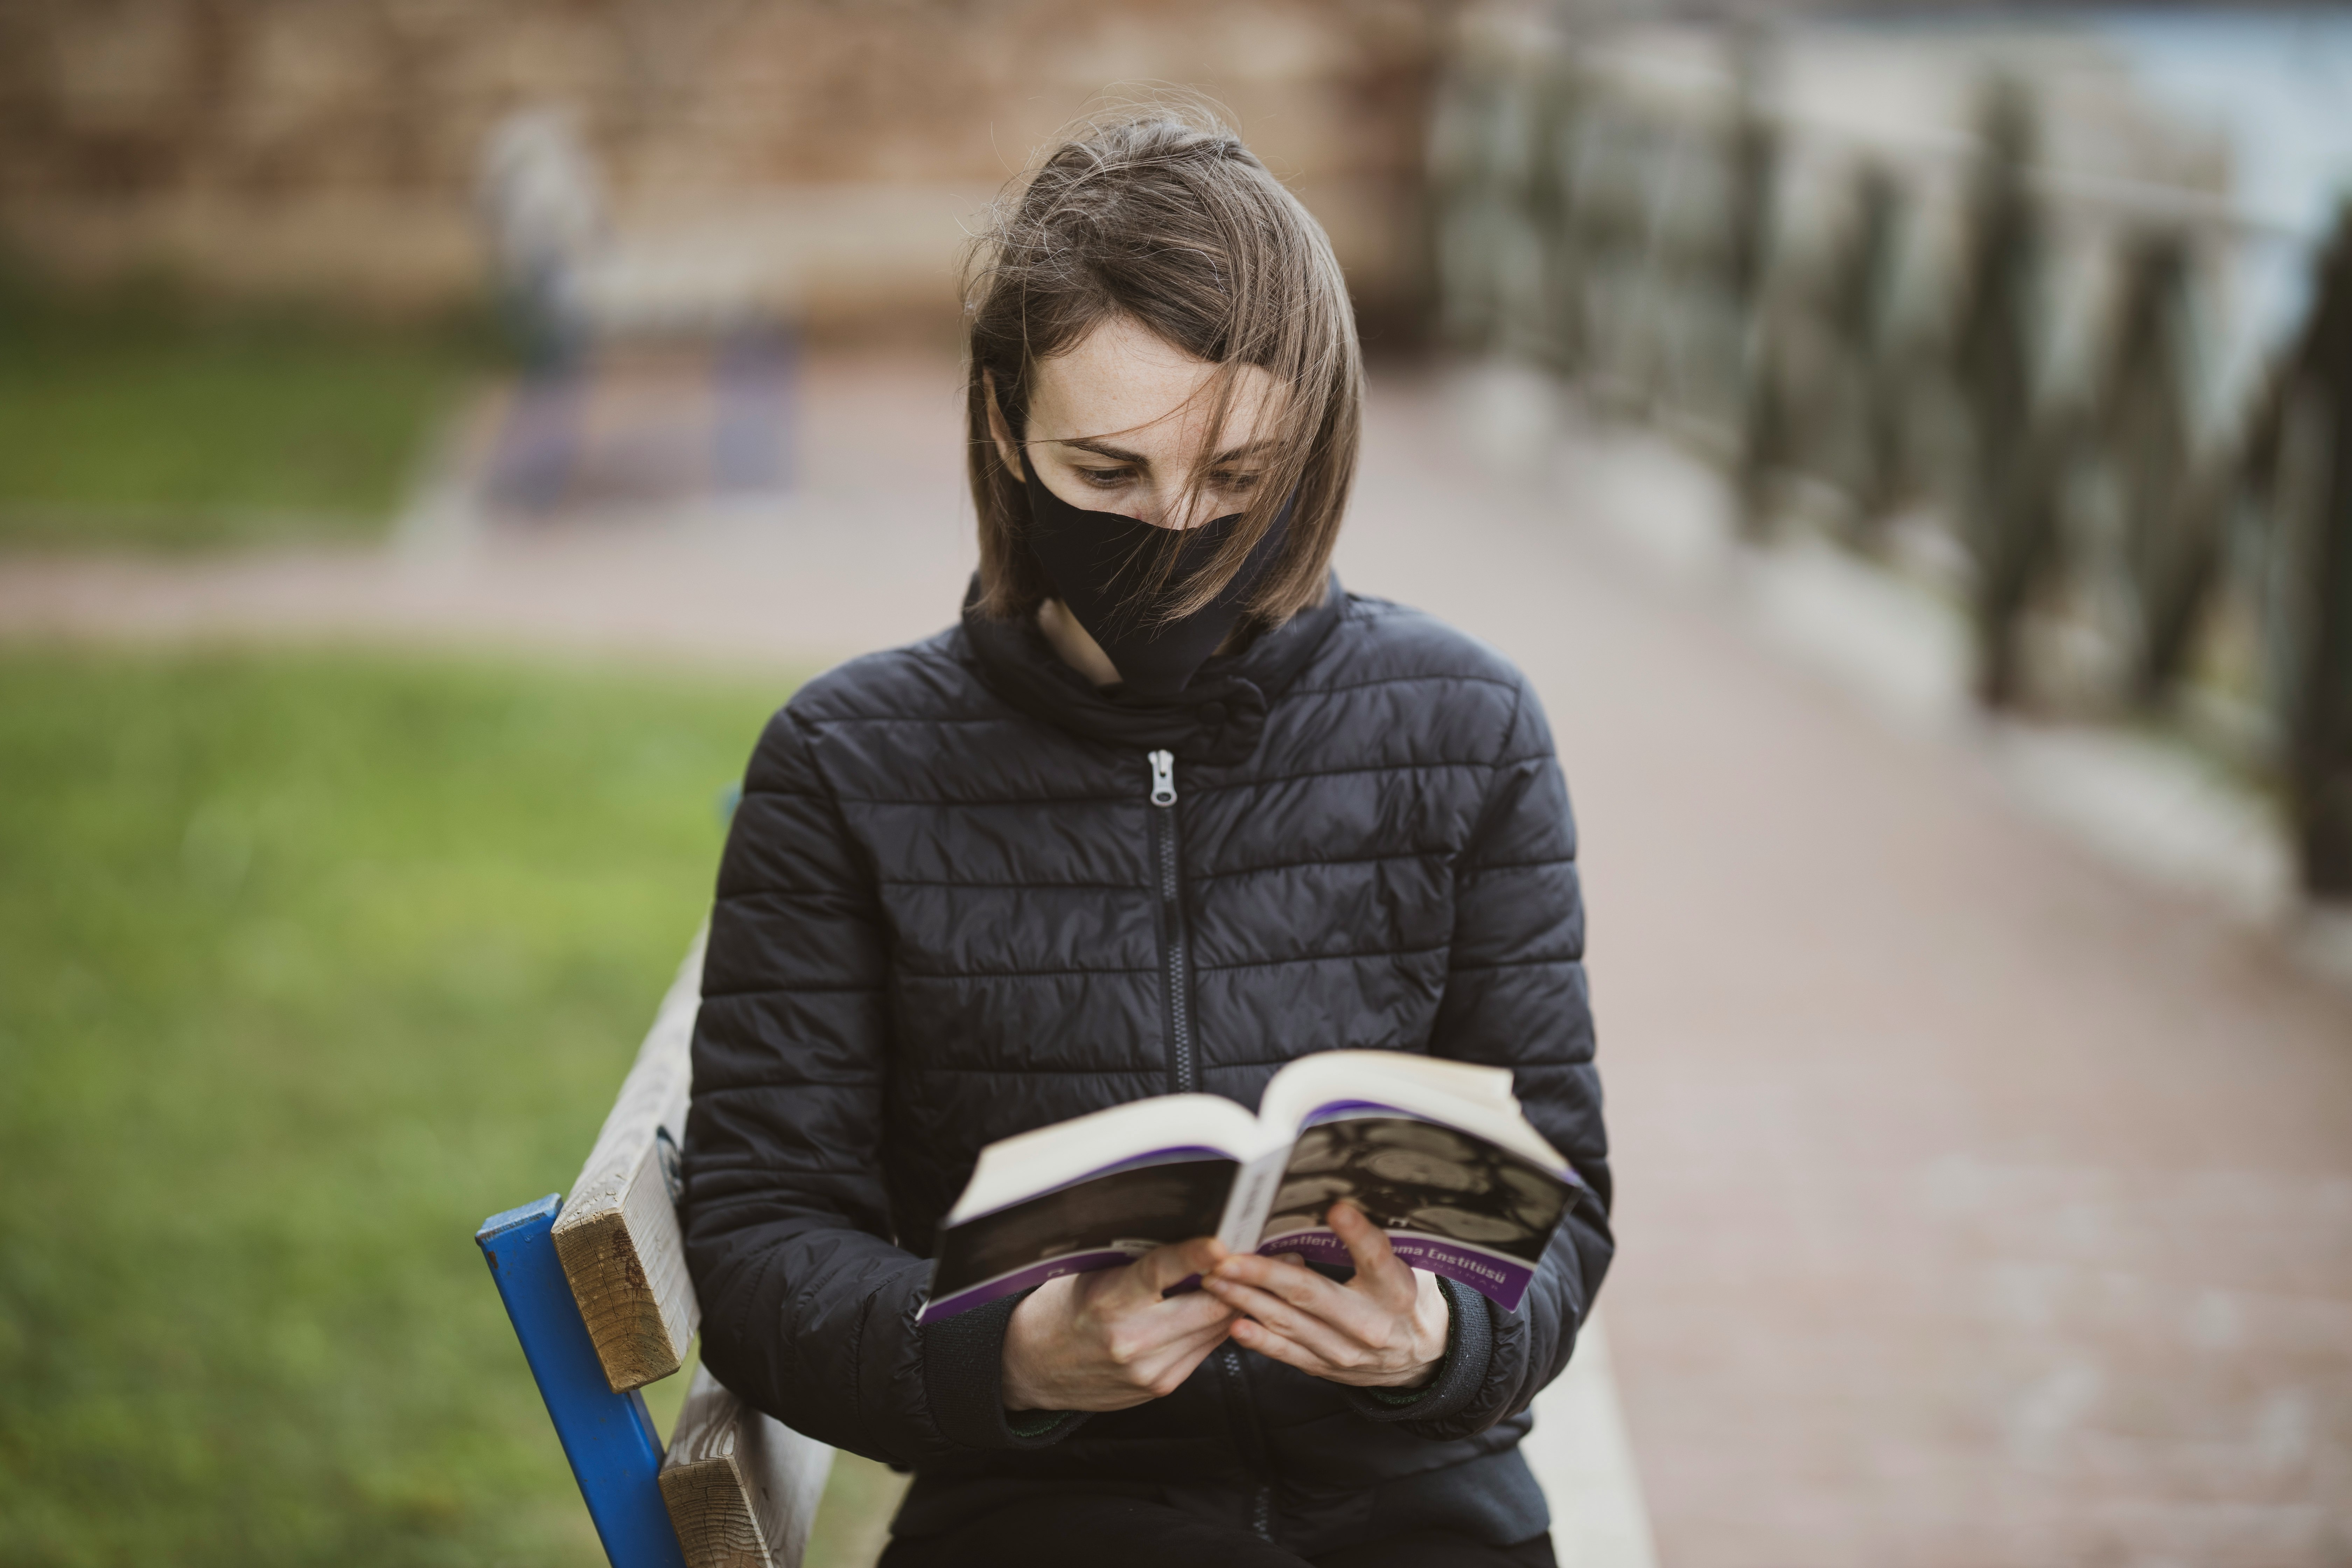 woman in black jacket sitting on bench while reading book during daytime